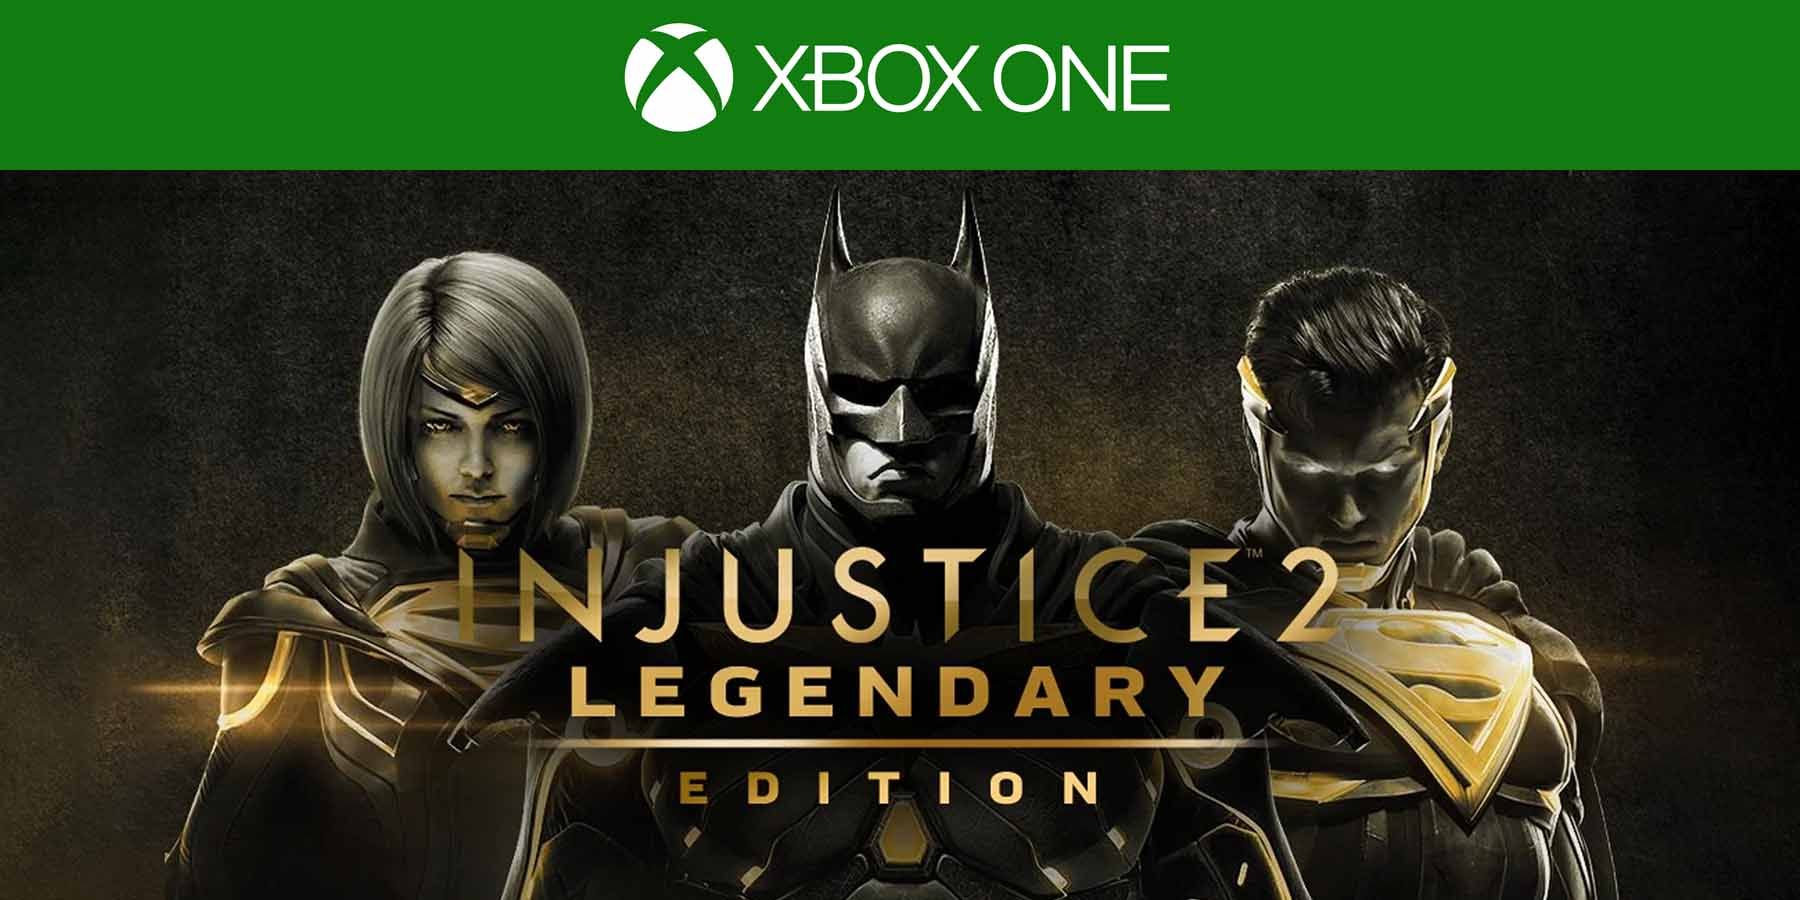 wb-games-injustice-2-legendary-edition-xbox-one-gamerant-holiday-gift-guide-amazon-products